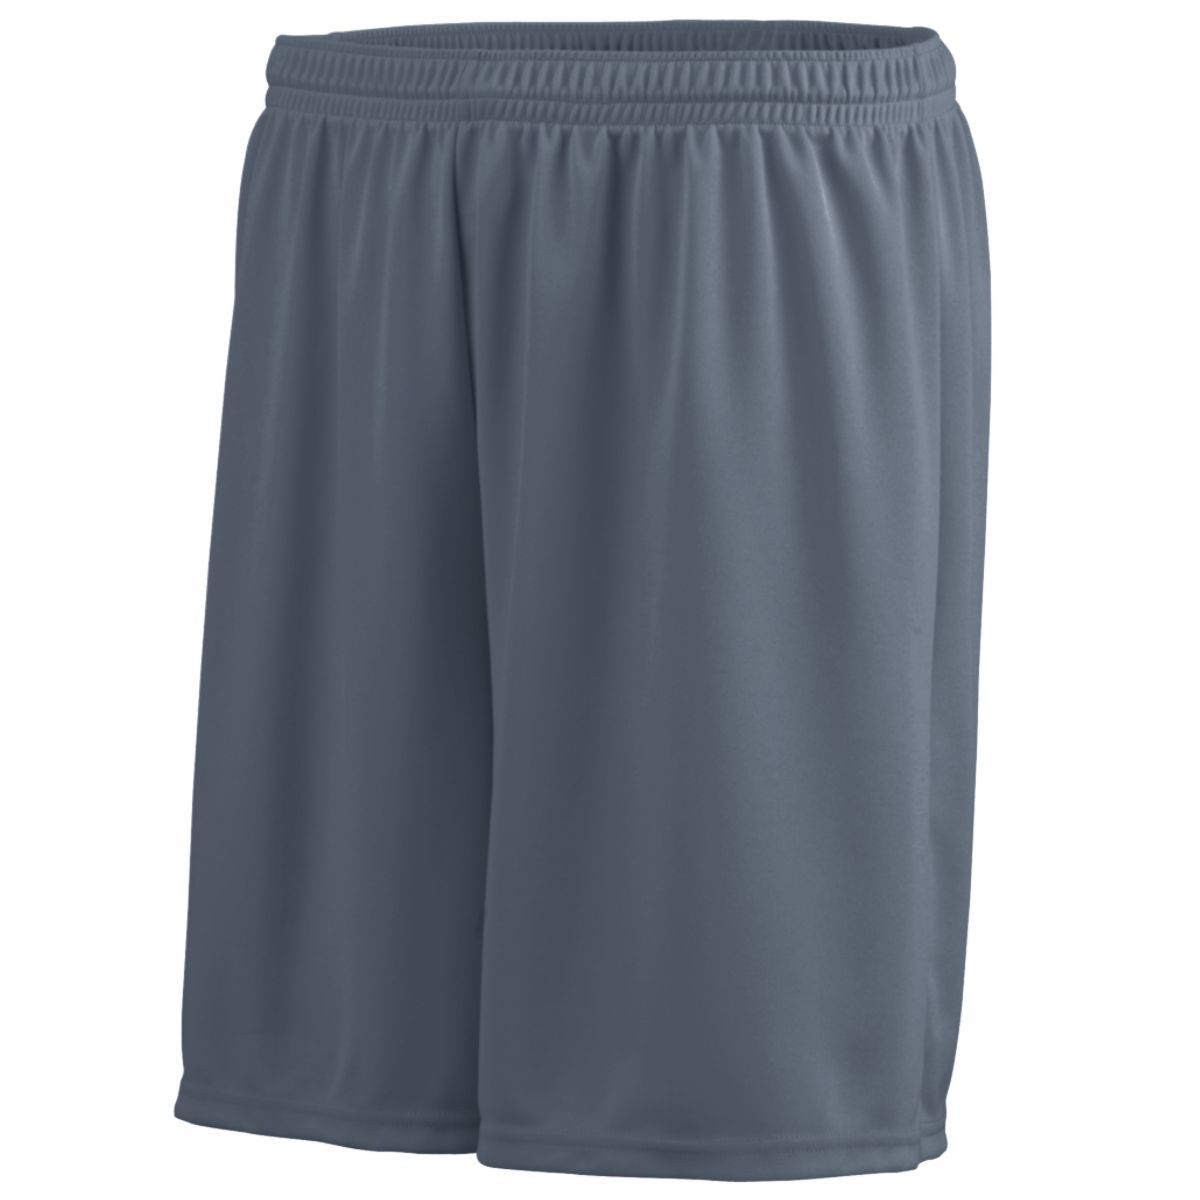 Augusta Sportswear Octane Shorts in Graphite  -Part of the Adult, Adult-Shorts, Augusta-Products product lines at KanaleyCreations.com